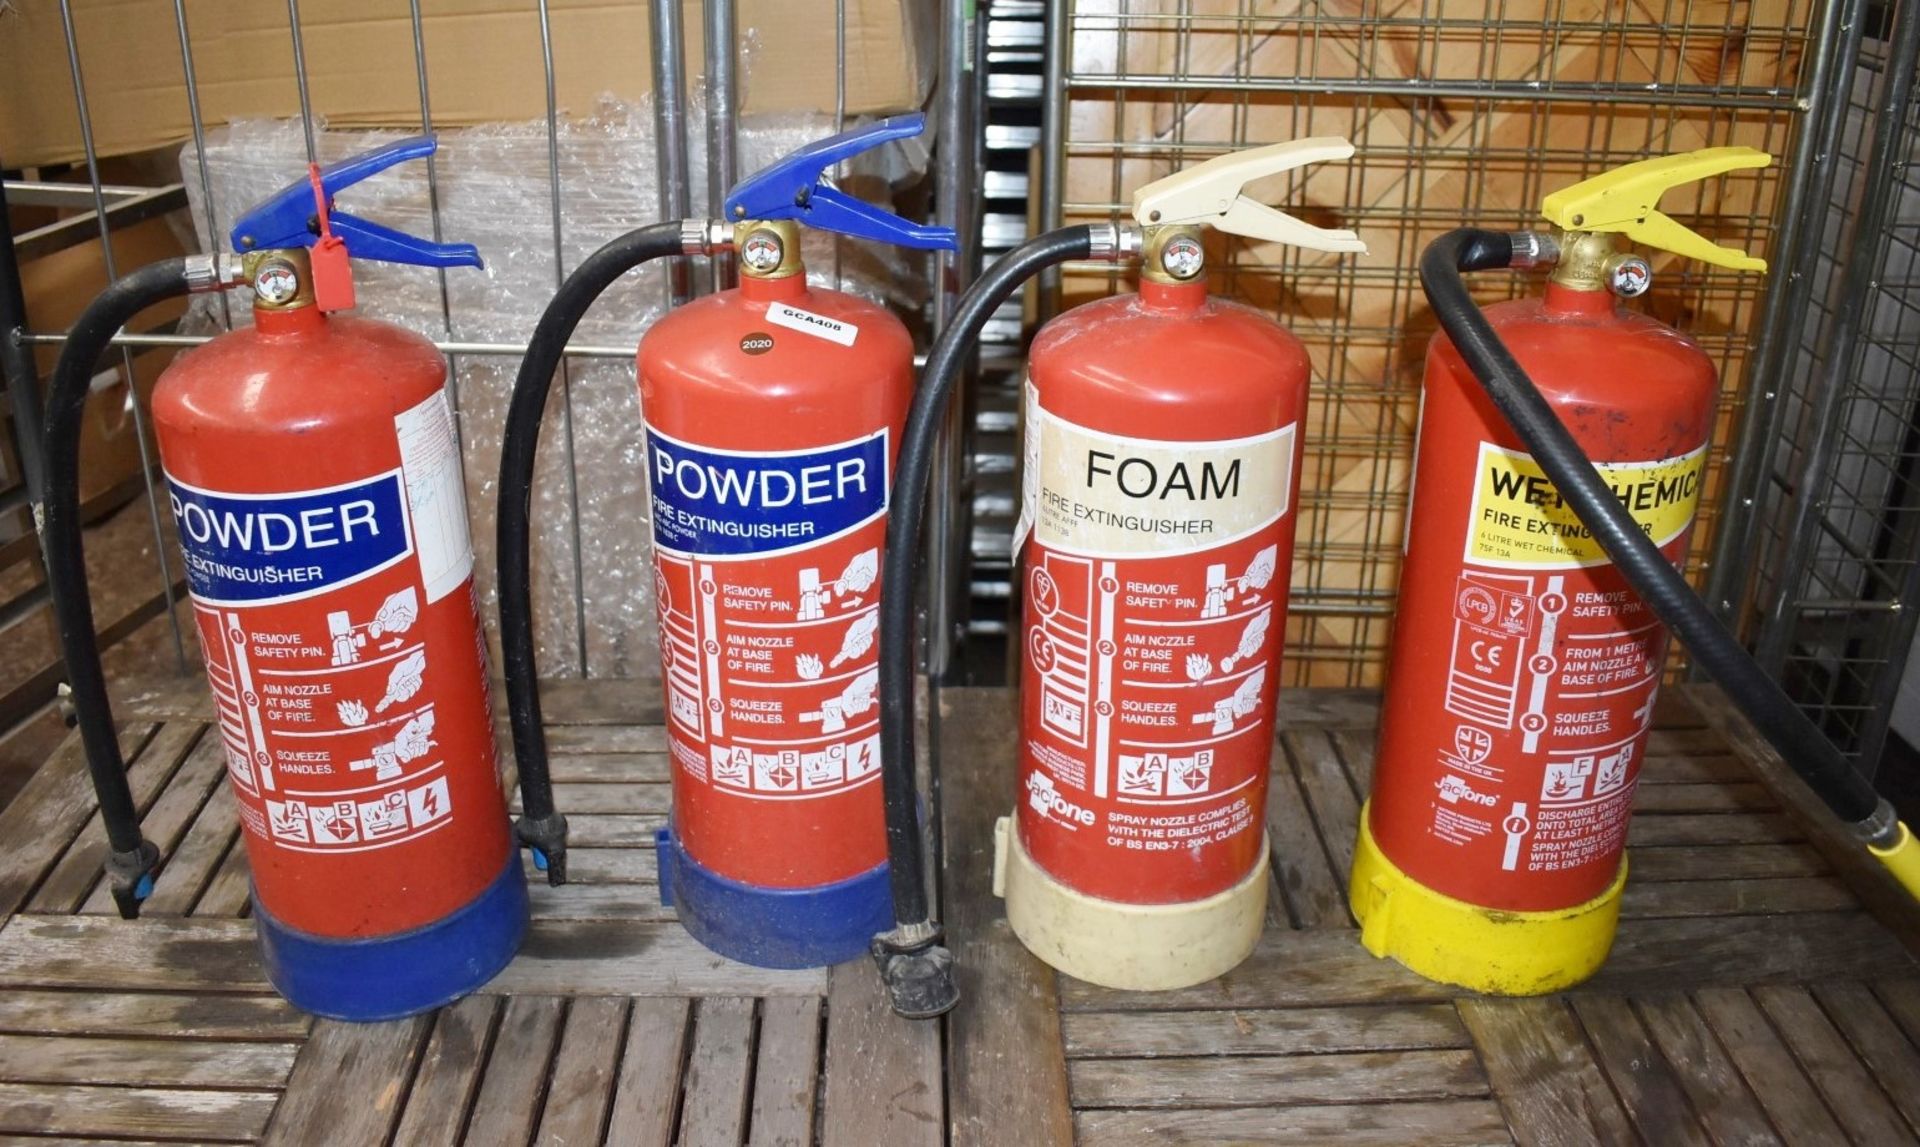 4 x Various Fire Extinguishers - Includes Power, Foam and Wet Chemical - CL011 - Ref: GCA408 WH5 -